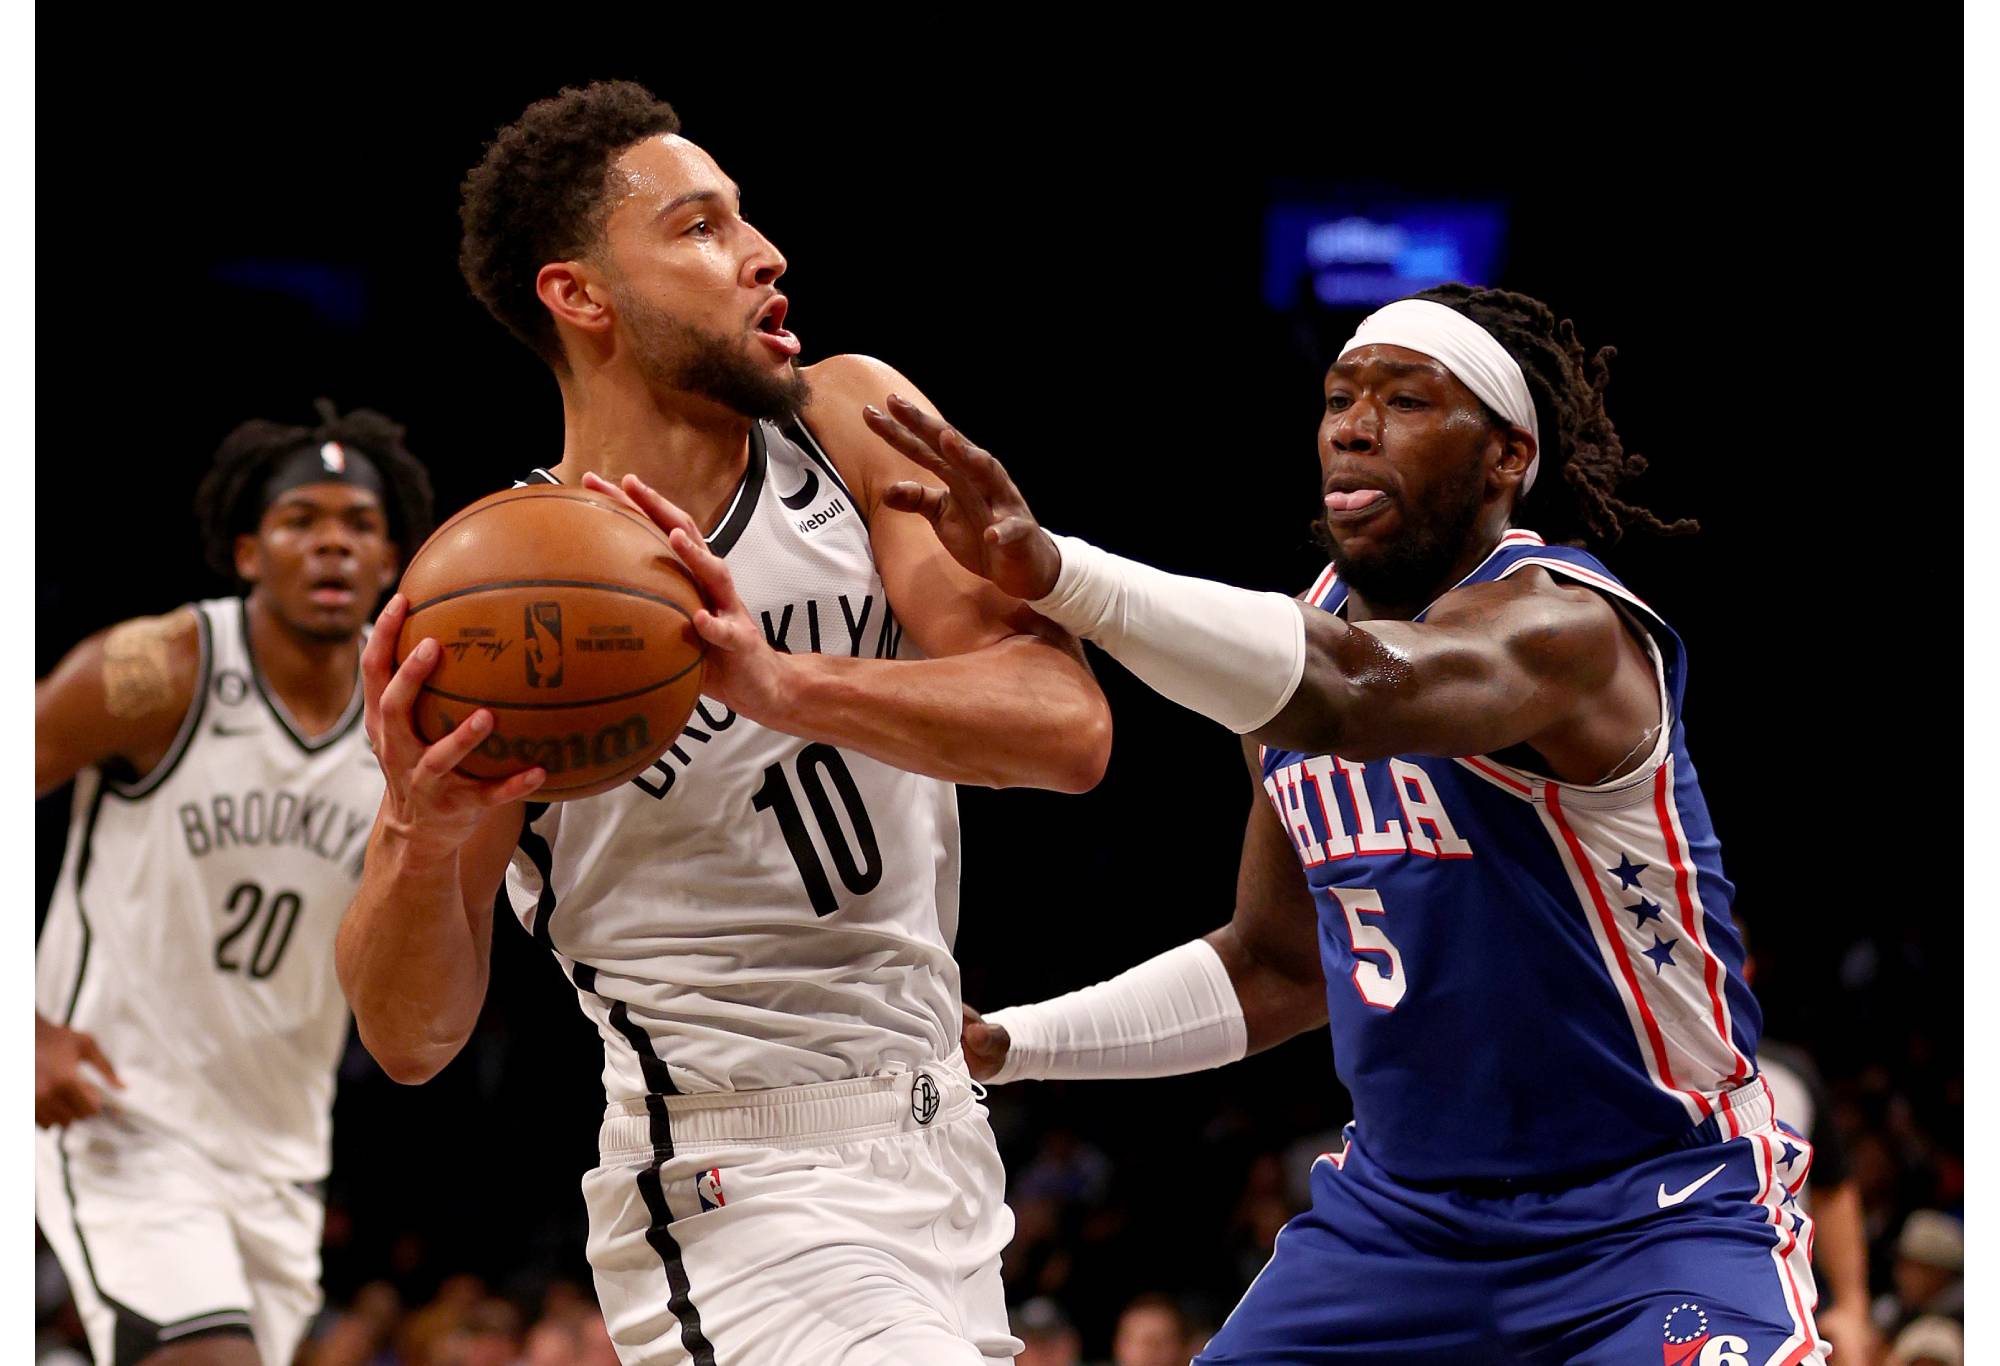 Ben’s back: Simmons struggles in NBA return at Nets but ‘had a lot of fun out there’